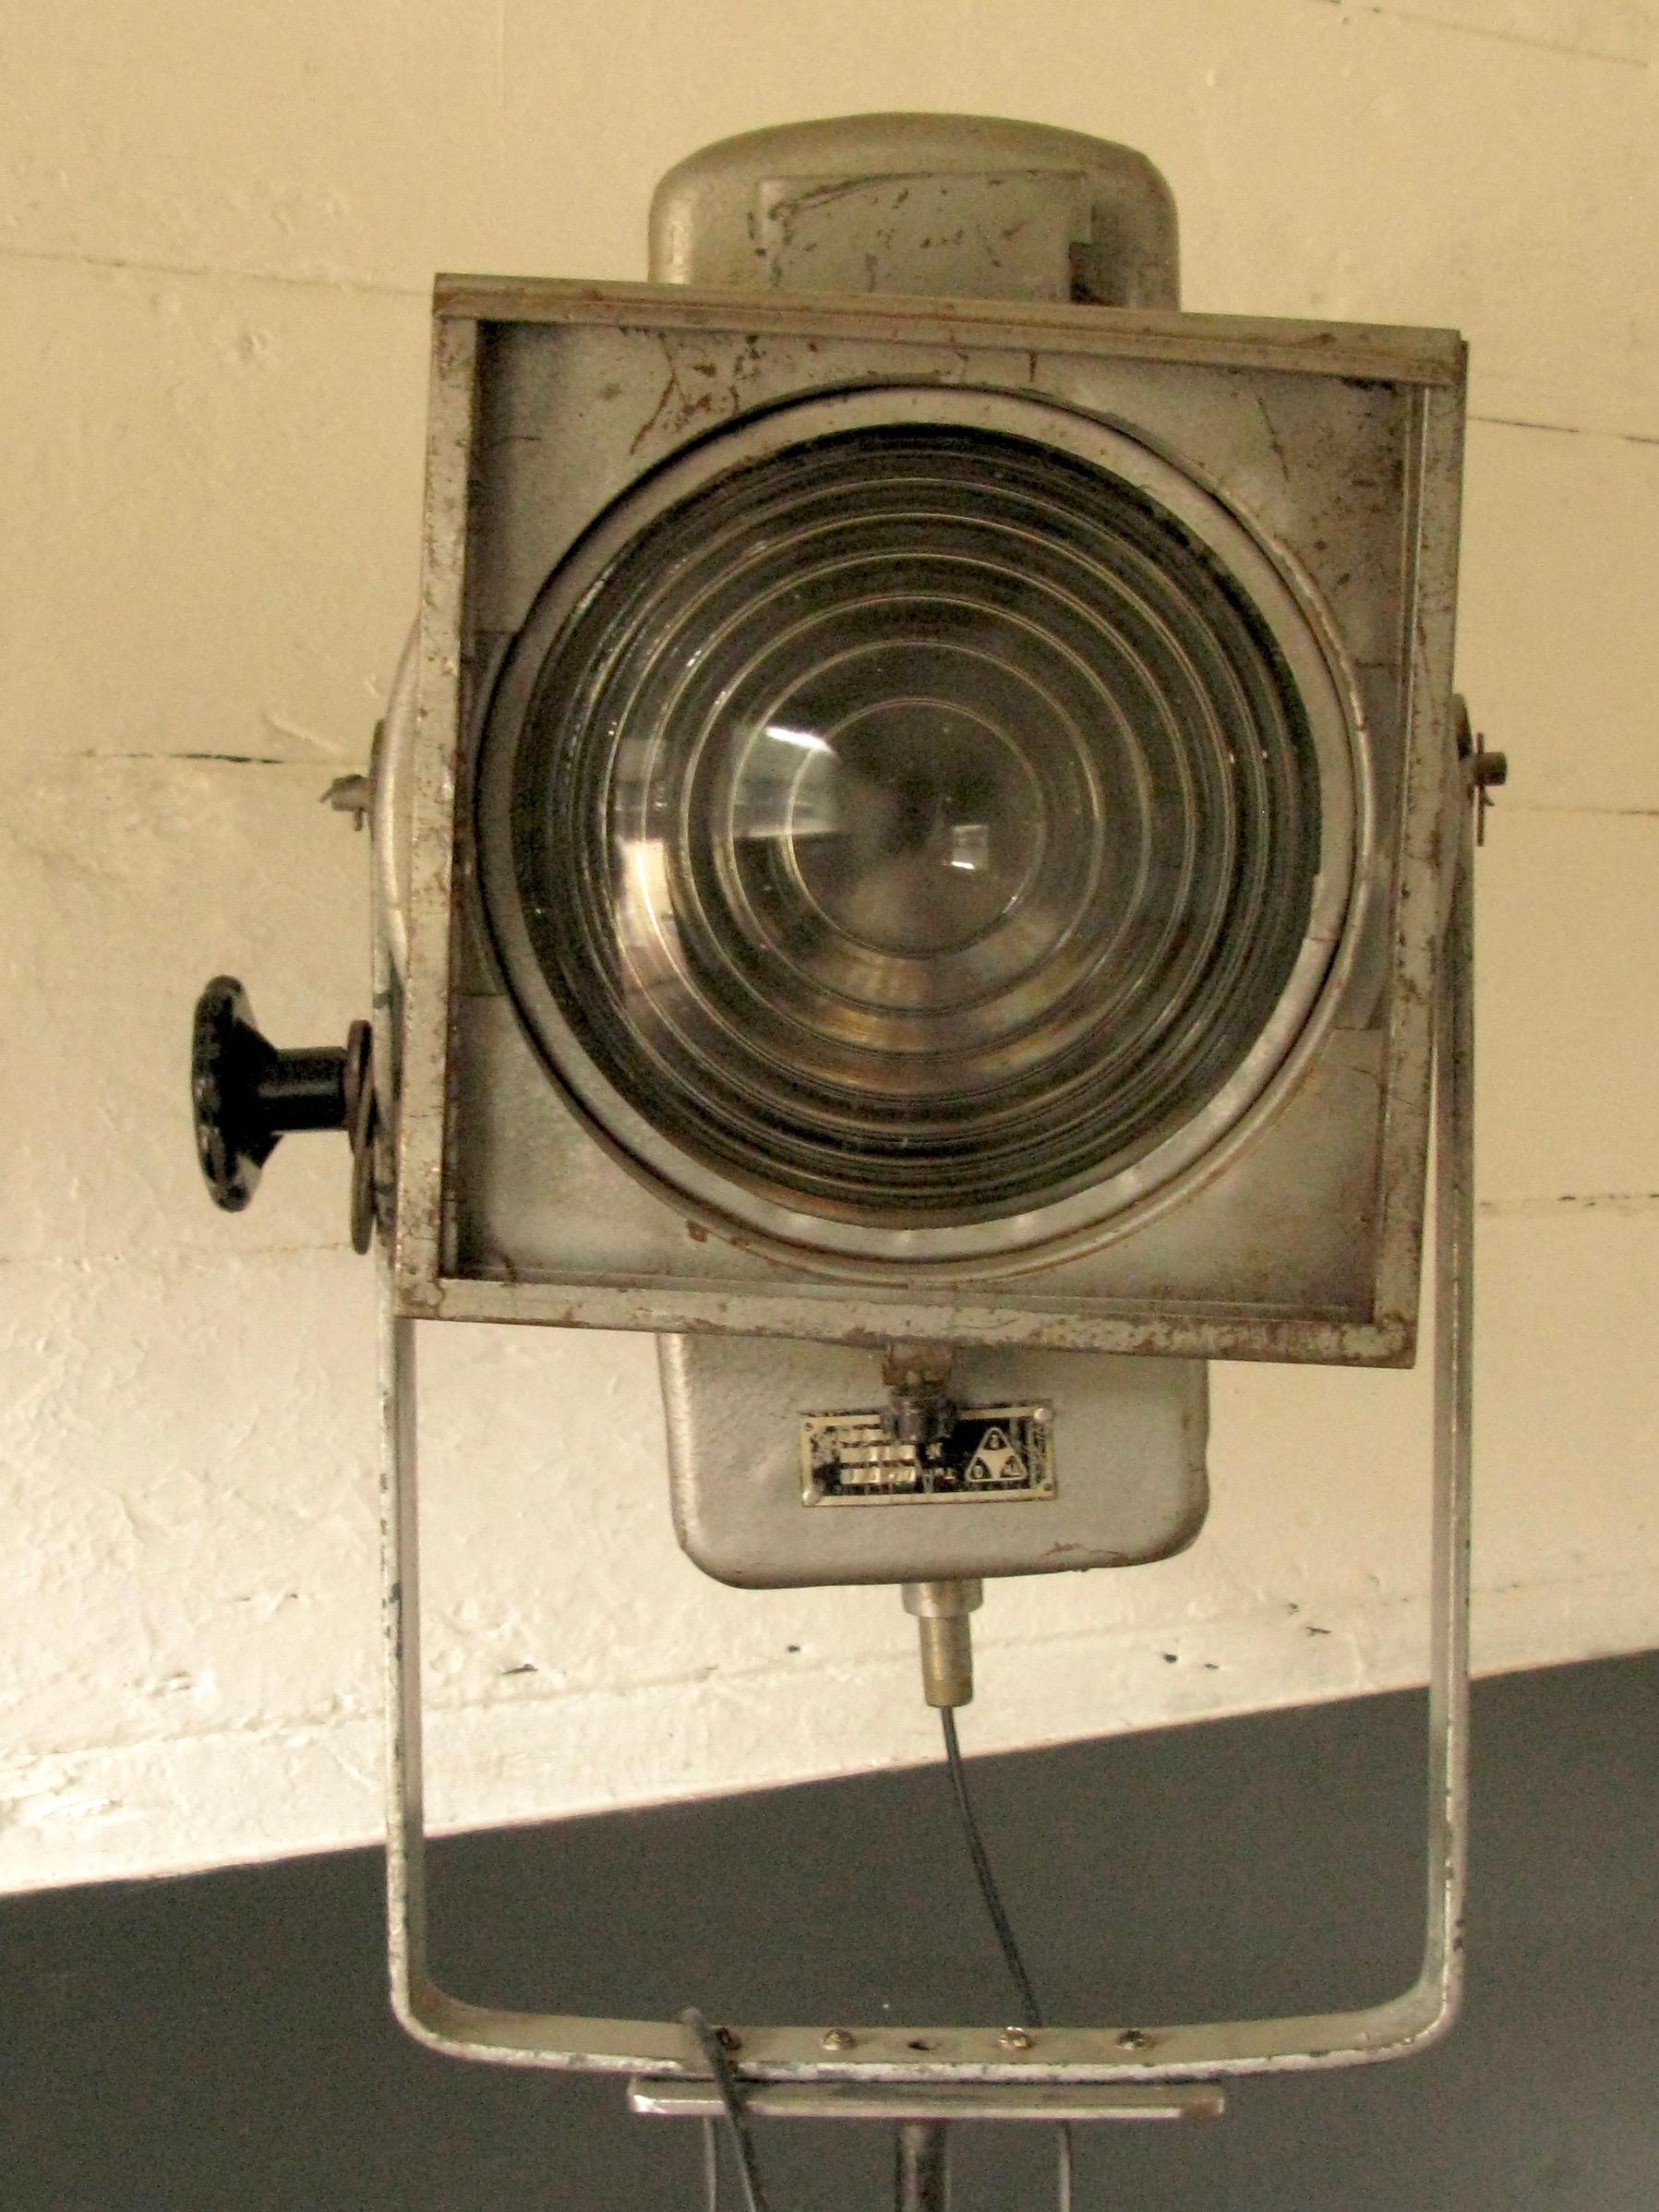 Post-Modern Theatre Lamp, Industrial, Old System, Mid-20th Century, Loft, Focus England